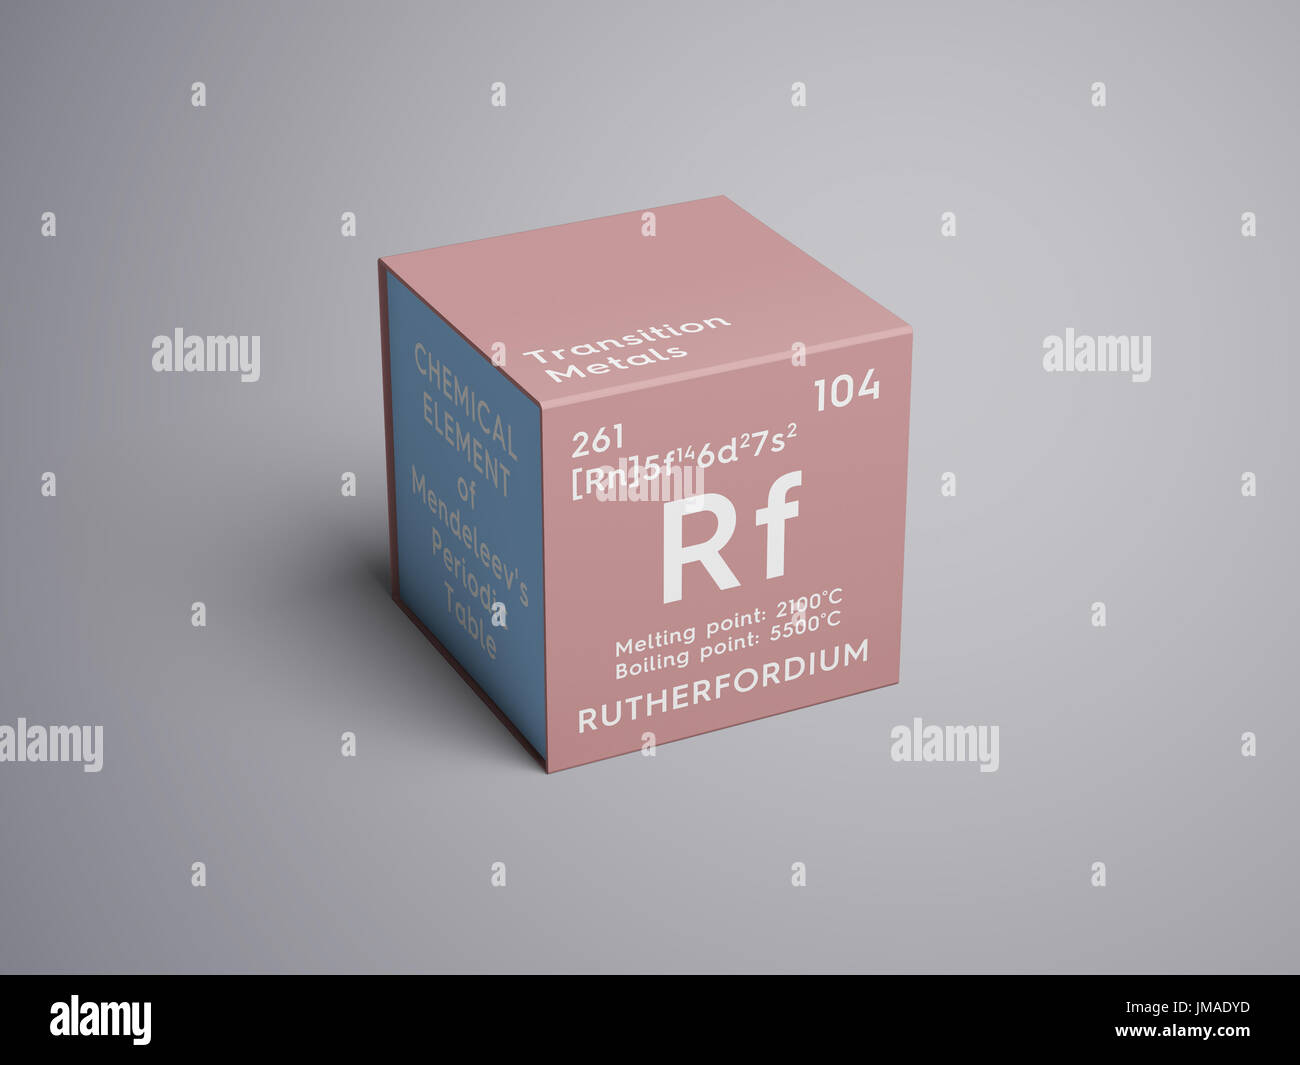 Rutherfordium. Transition metals. Chemical Element of Mendeleev's Periodic Table. Rutherfordium in square cube creative concept. Stock Photo